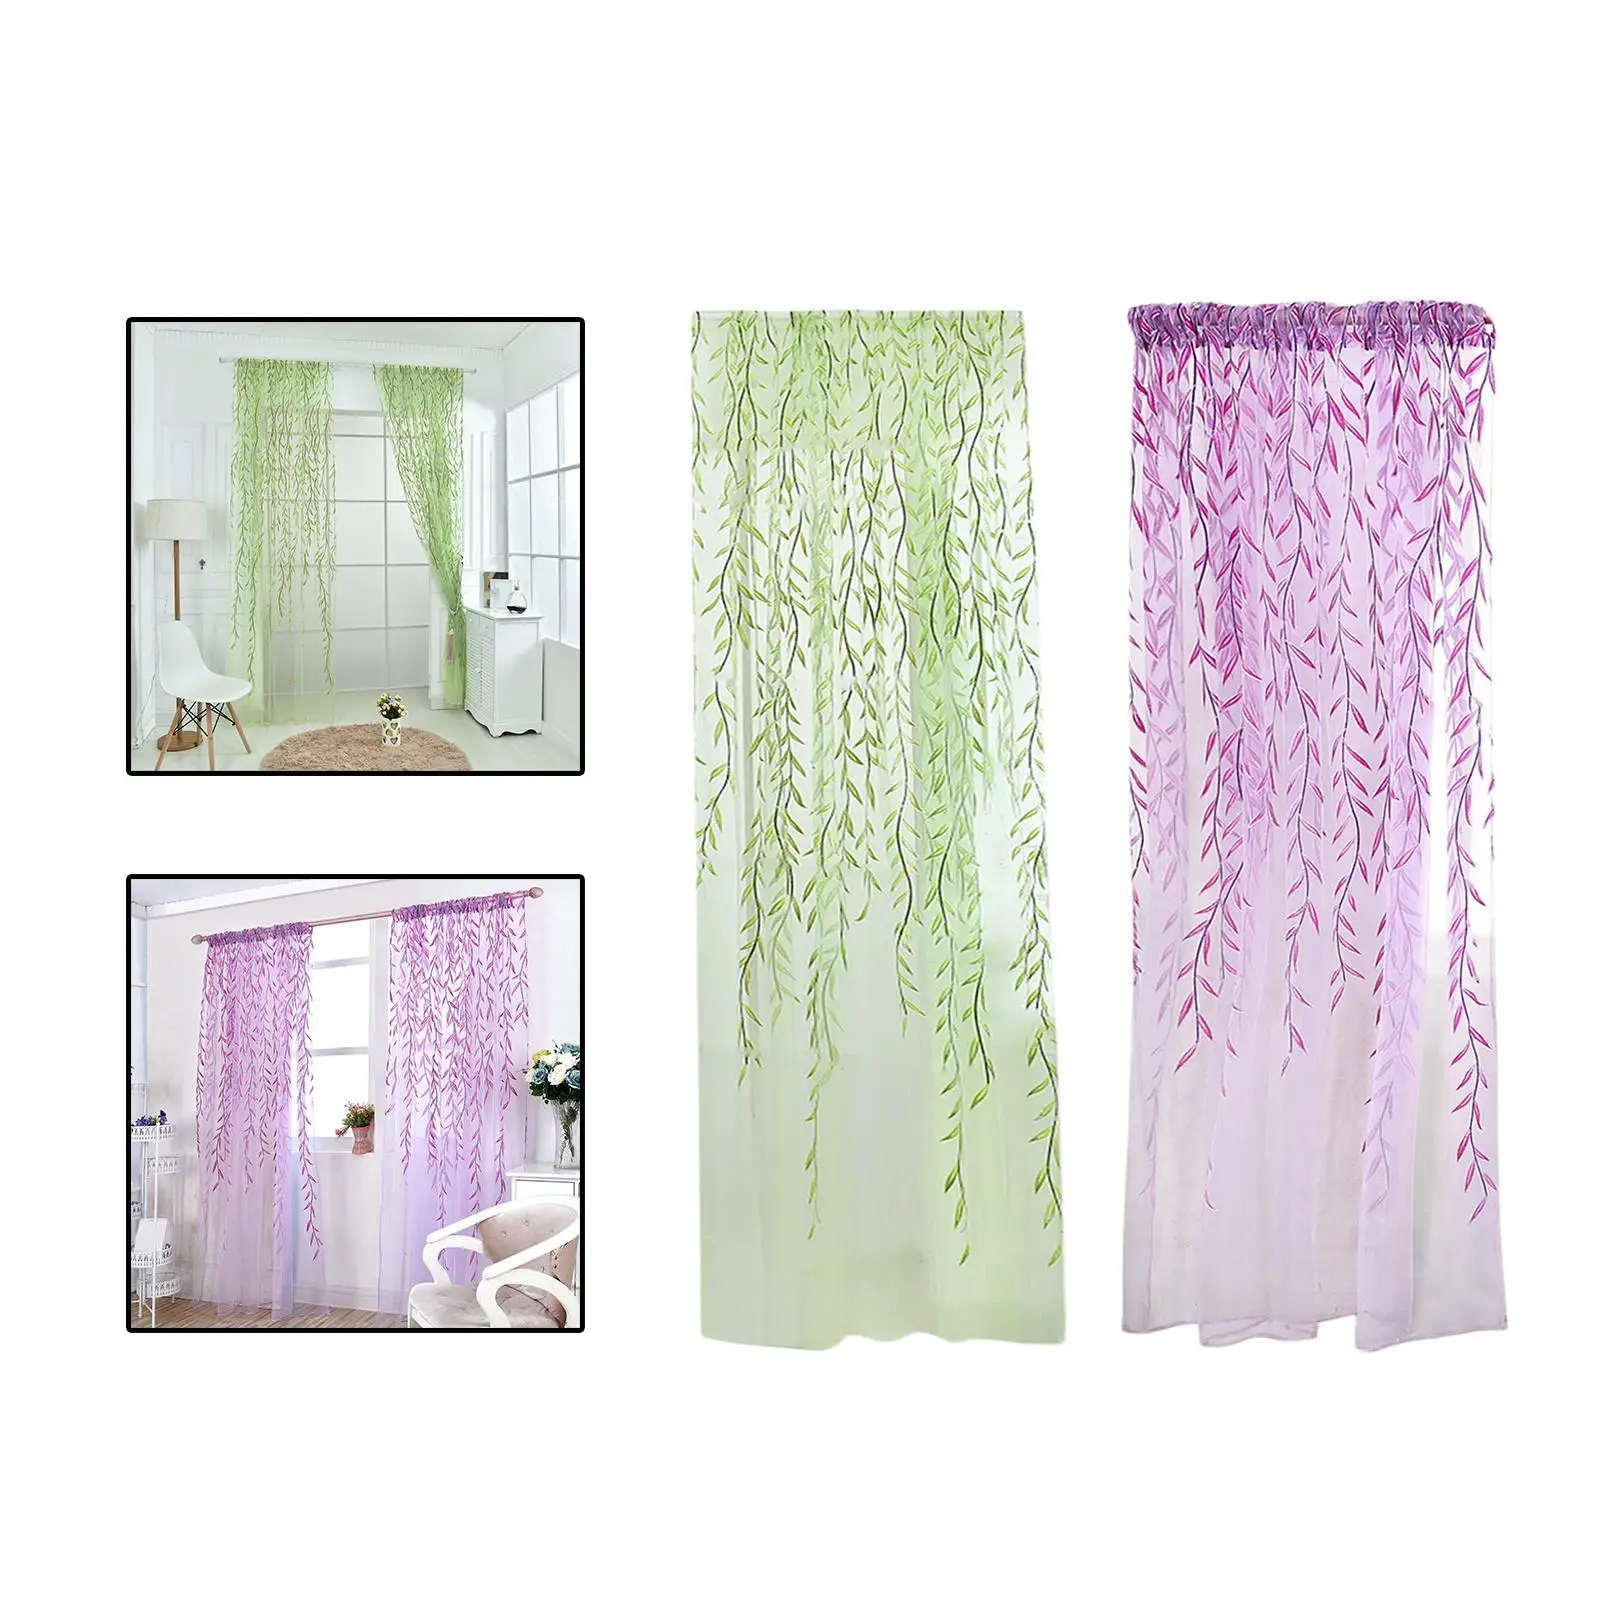 Windows Light Filtering Drapes Rustic Breathable Farmhouse Soft Voile Curtain for Bathroom Living Room 39.37`` x 78.74``